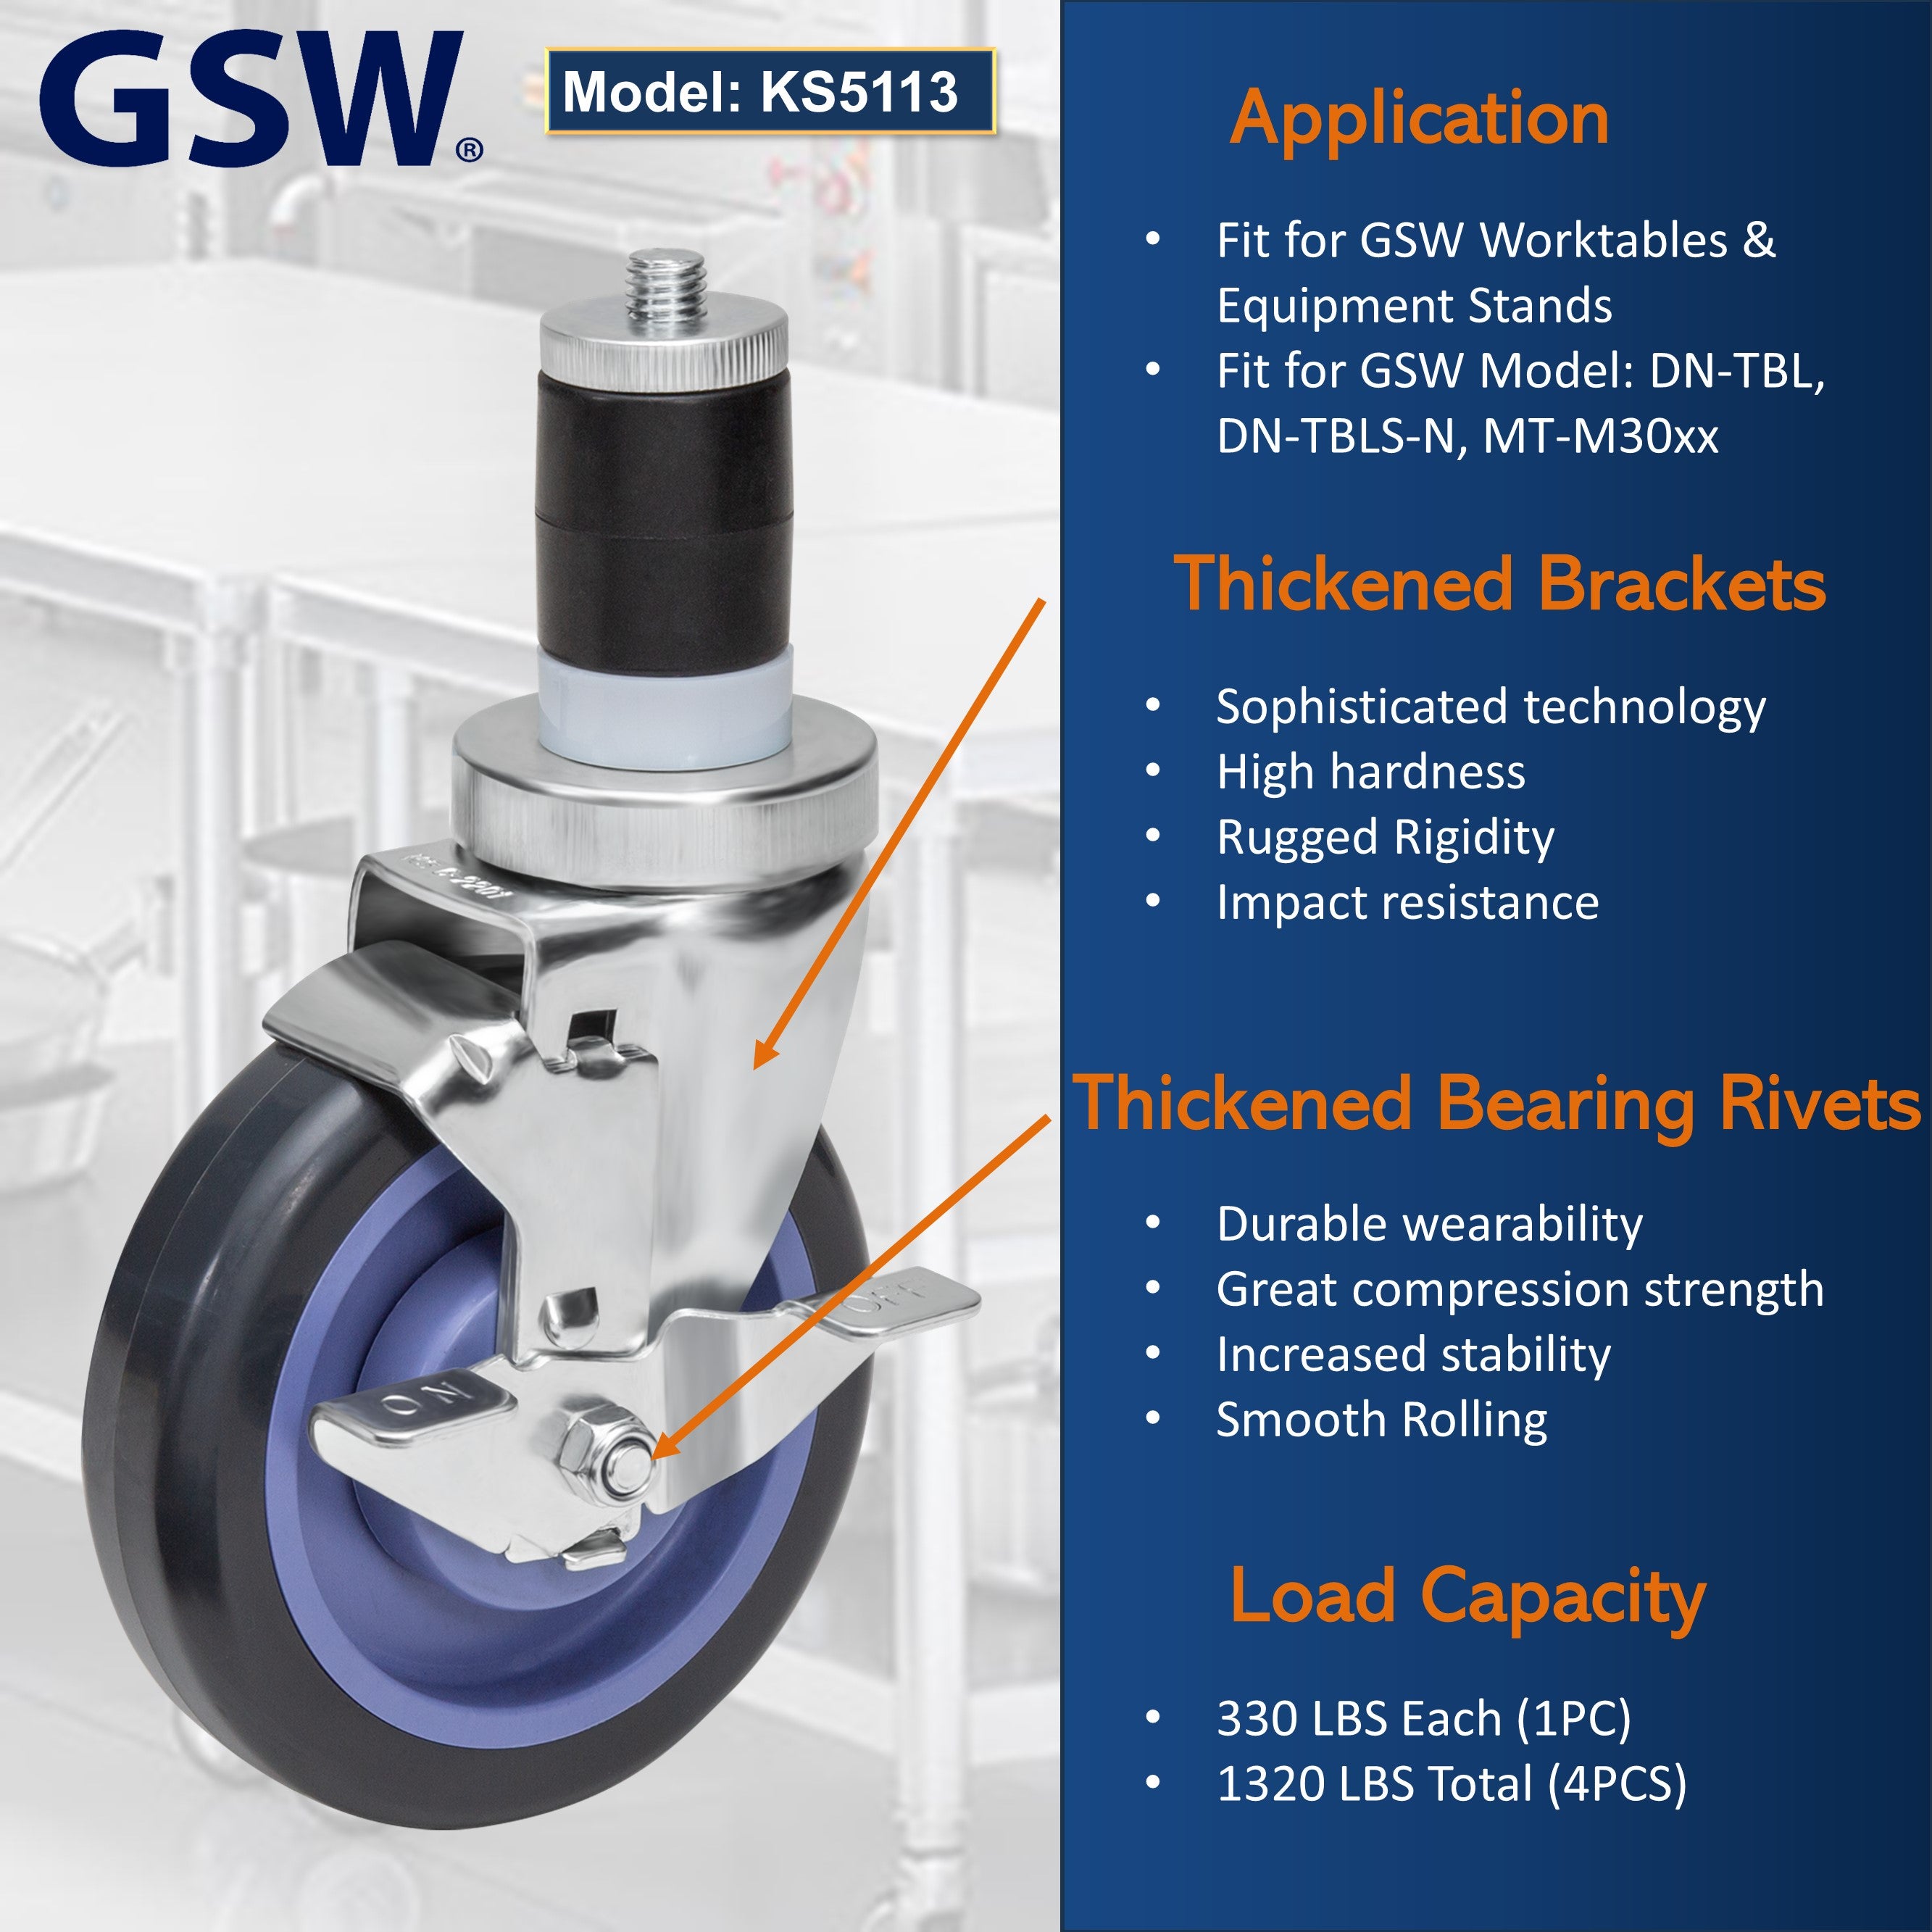 GSW 4" Heavy Duty Casters Wheels with Expanding Stem - Loading Capacity: 1320 lbs. Use for Worktables and Equipment Stands (Swivel with Brake)